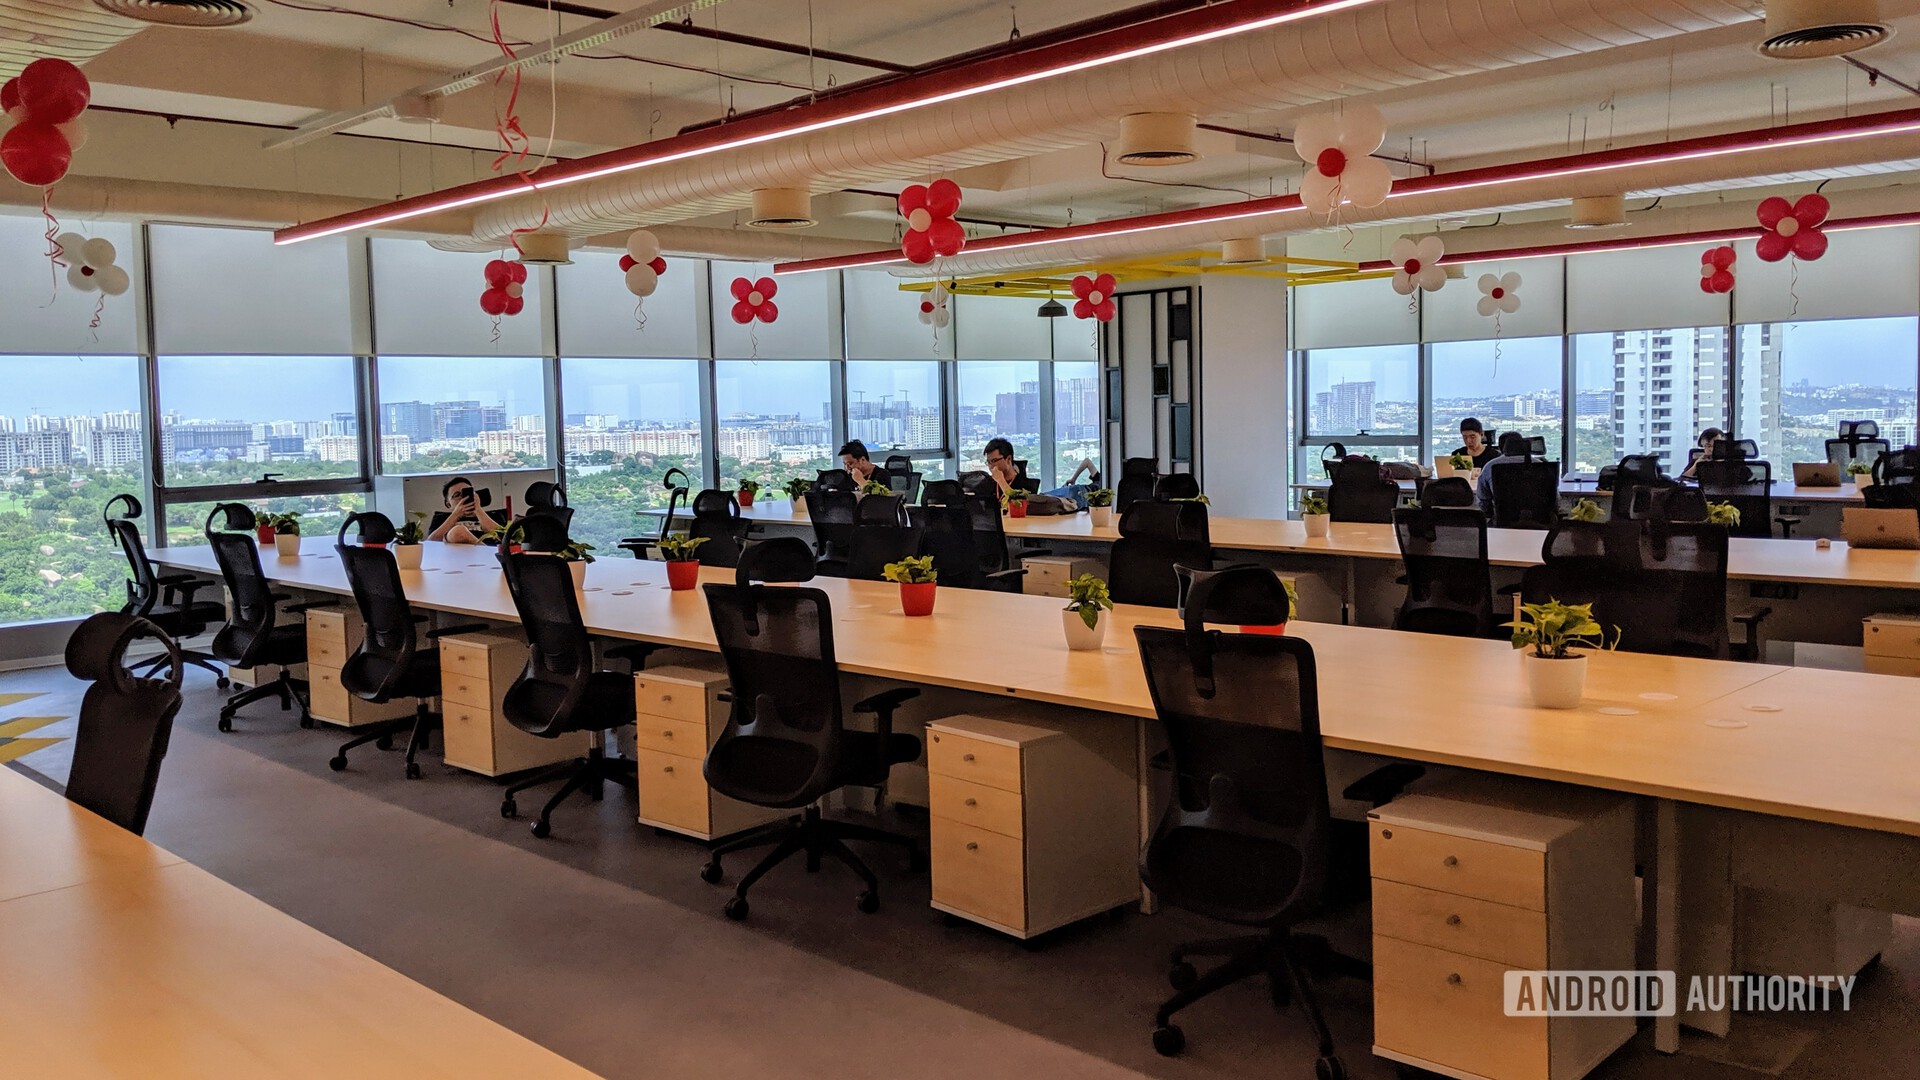 OnePlus R&amp;D research center hyderabad india